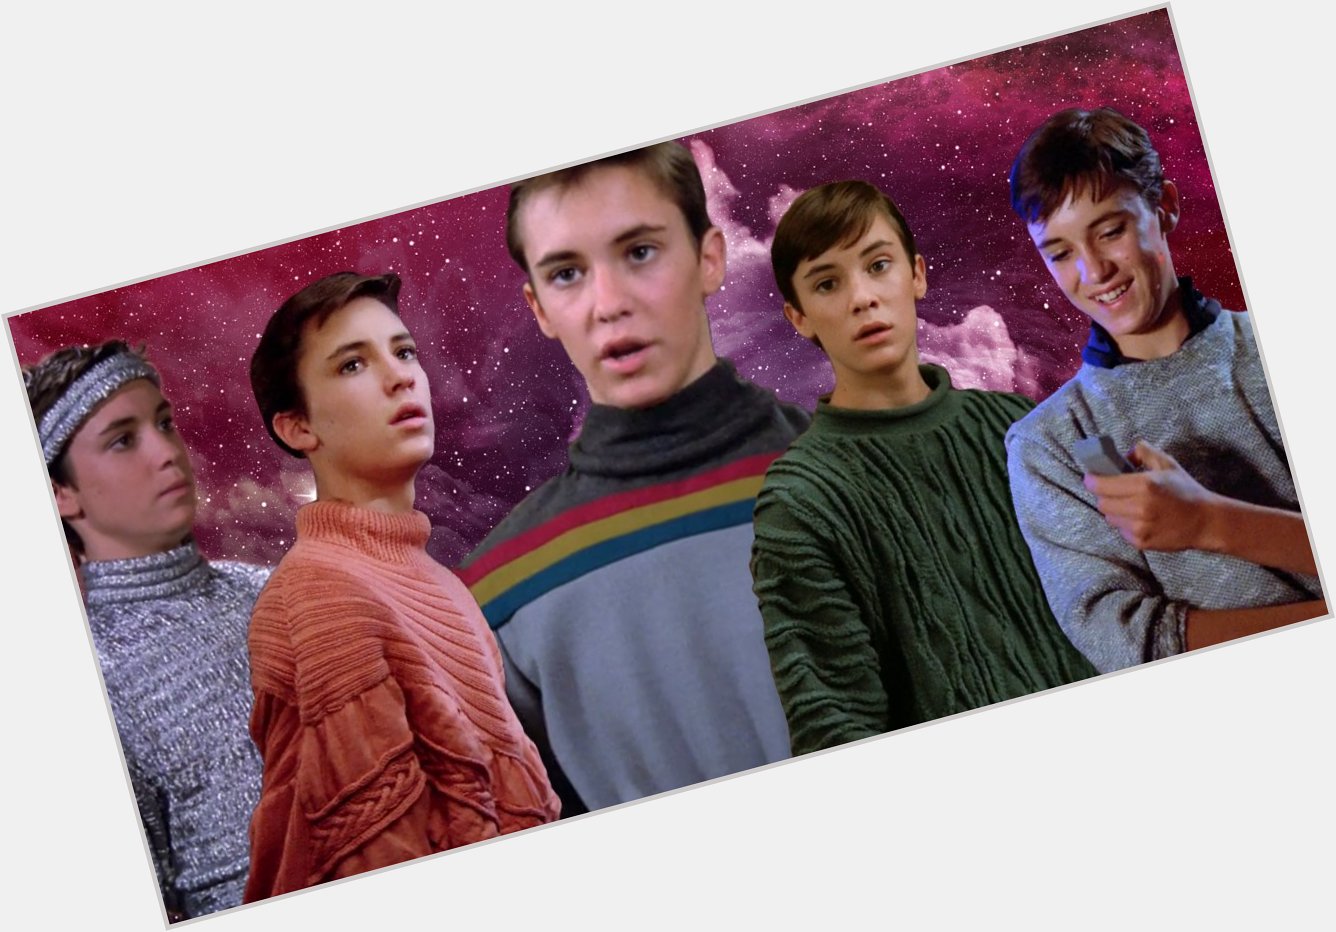 Happy Birthday to the one and only Wesley Crusher, Wil Wheaton. 